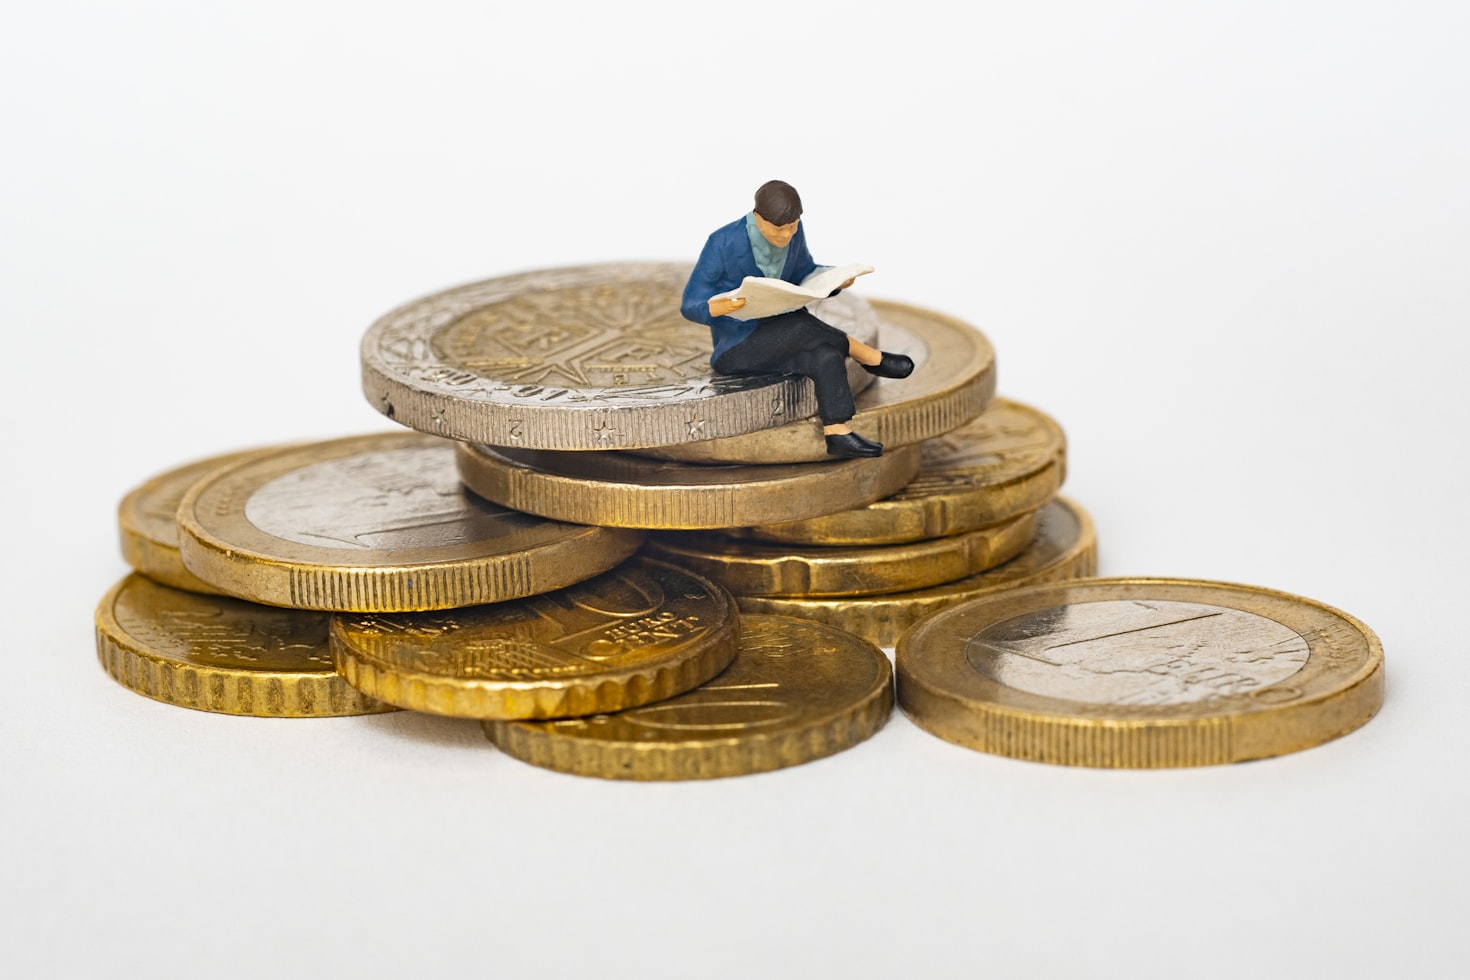 man sitting on coins pensively